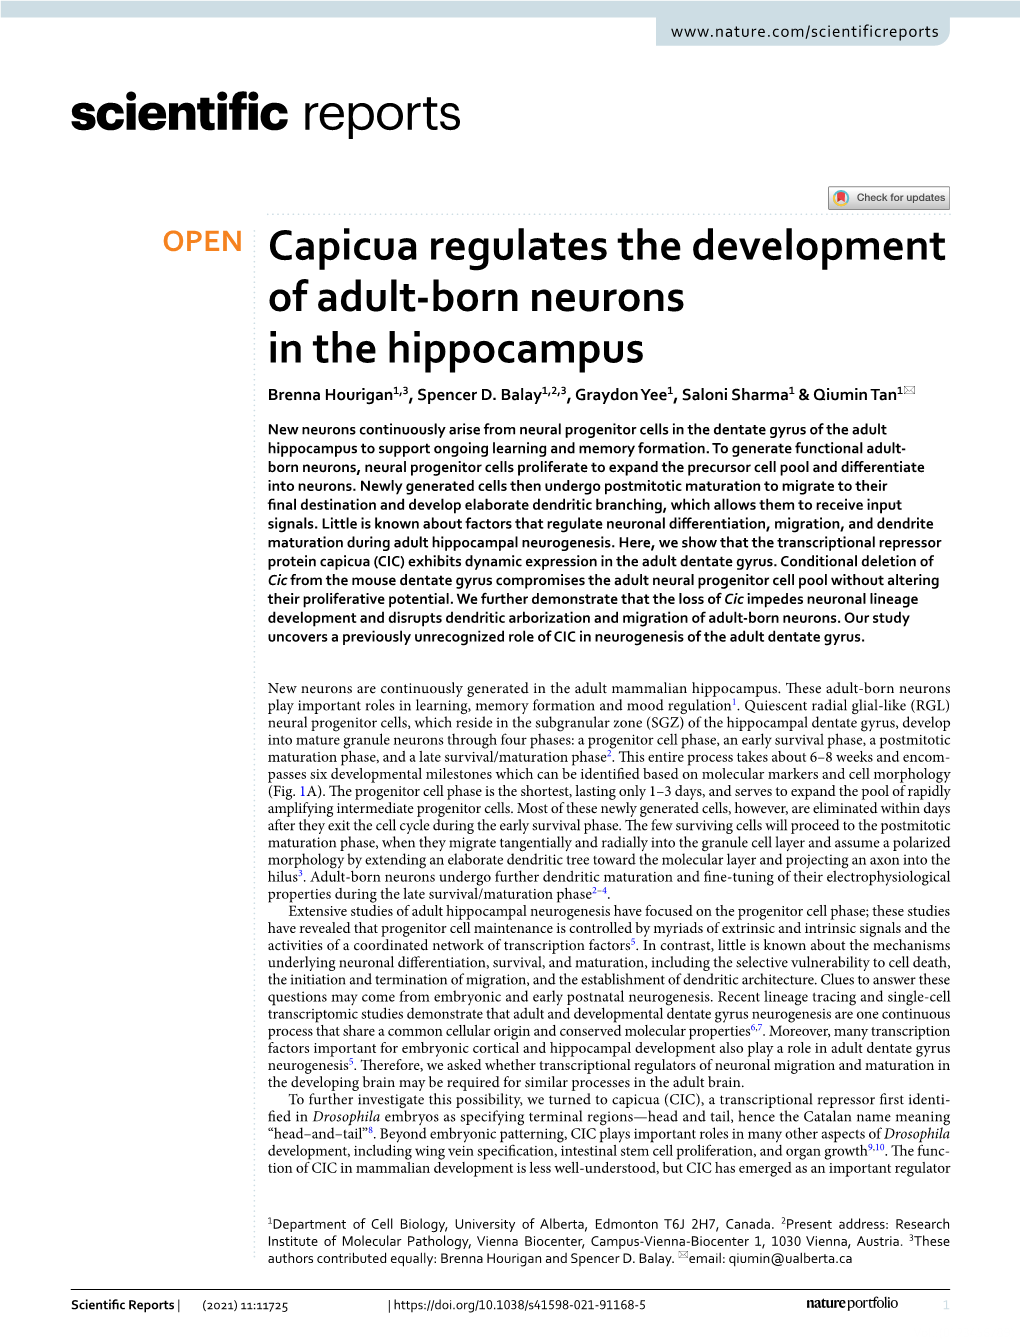 Capicua Regulates the Development of Adult-Born Neurons in The